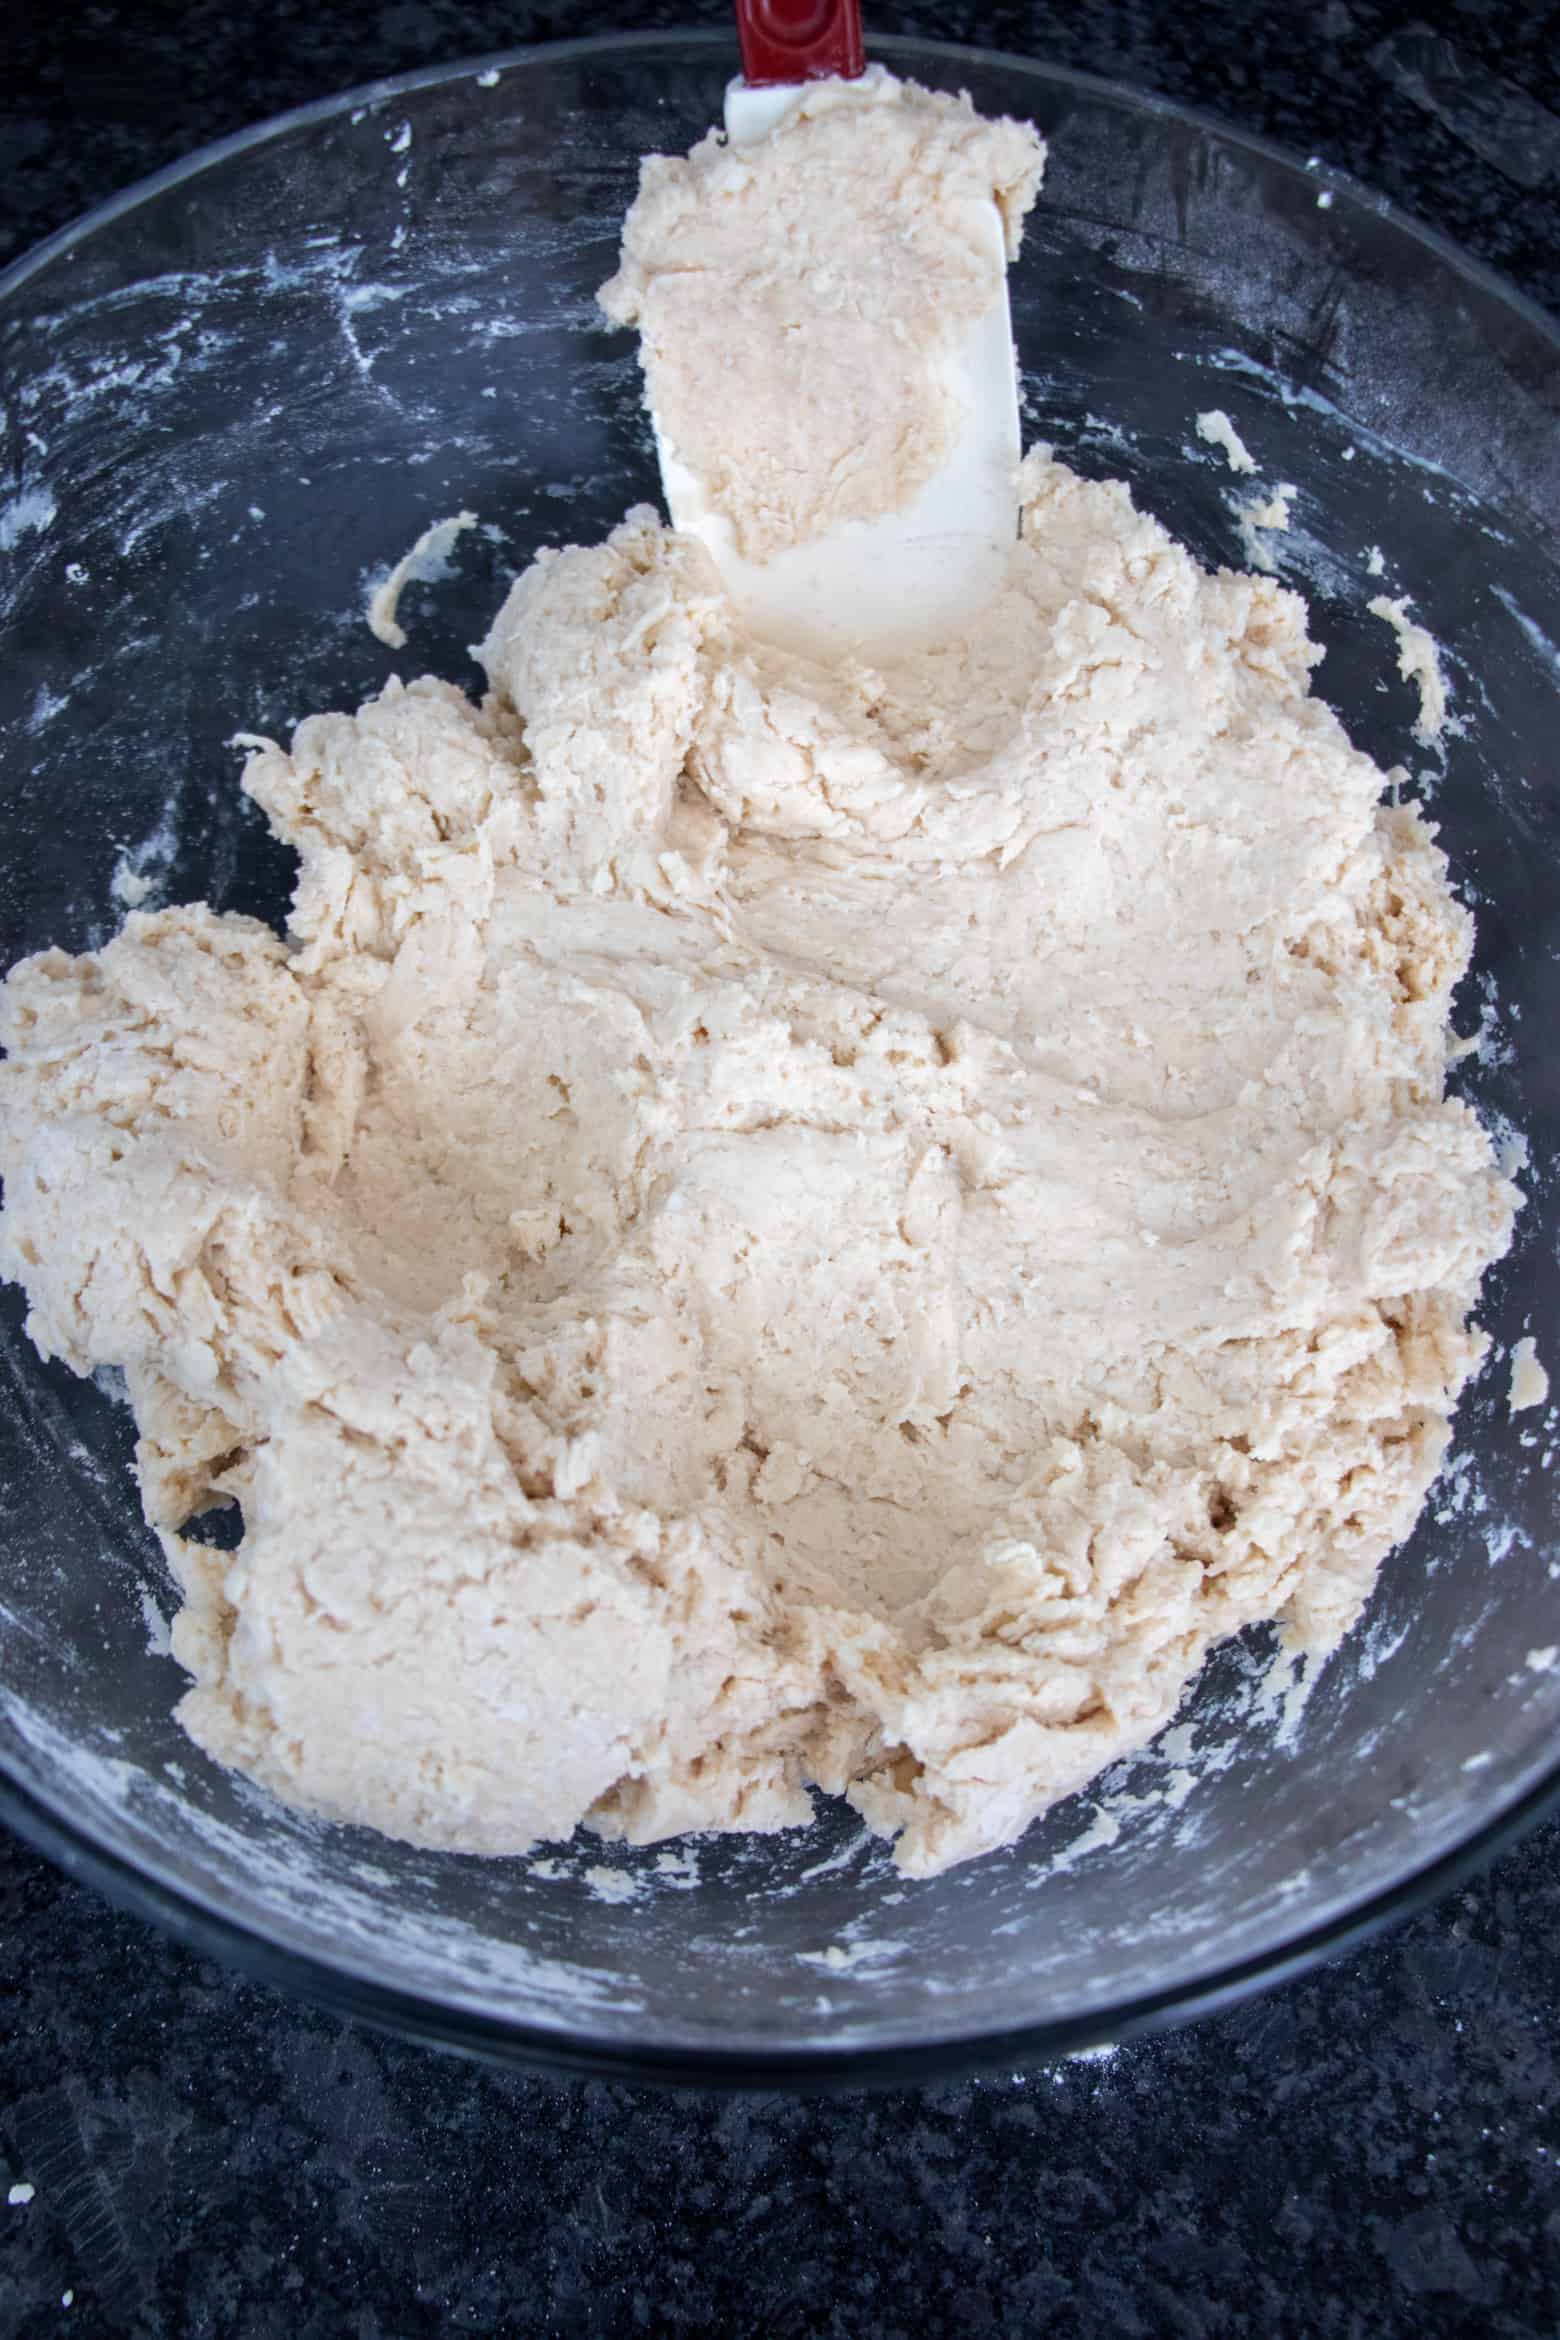 Pie dough mixed together.